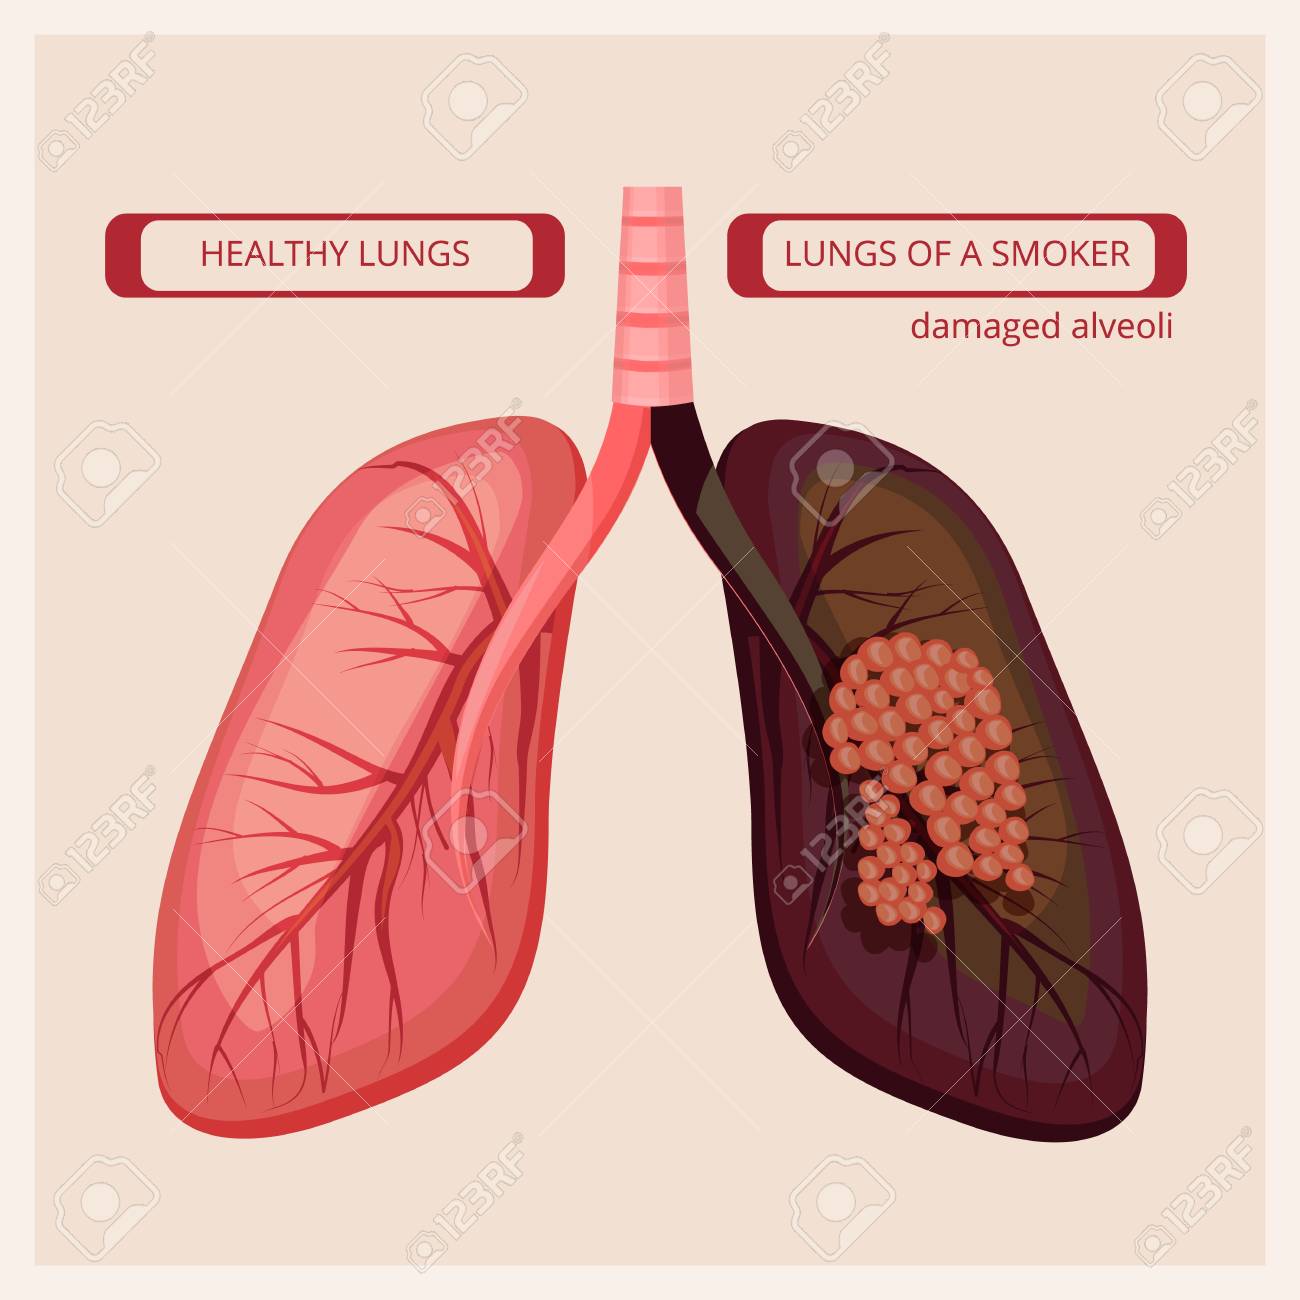 images of damaged lungs due to smoking